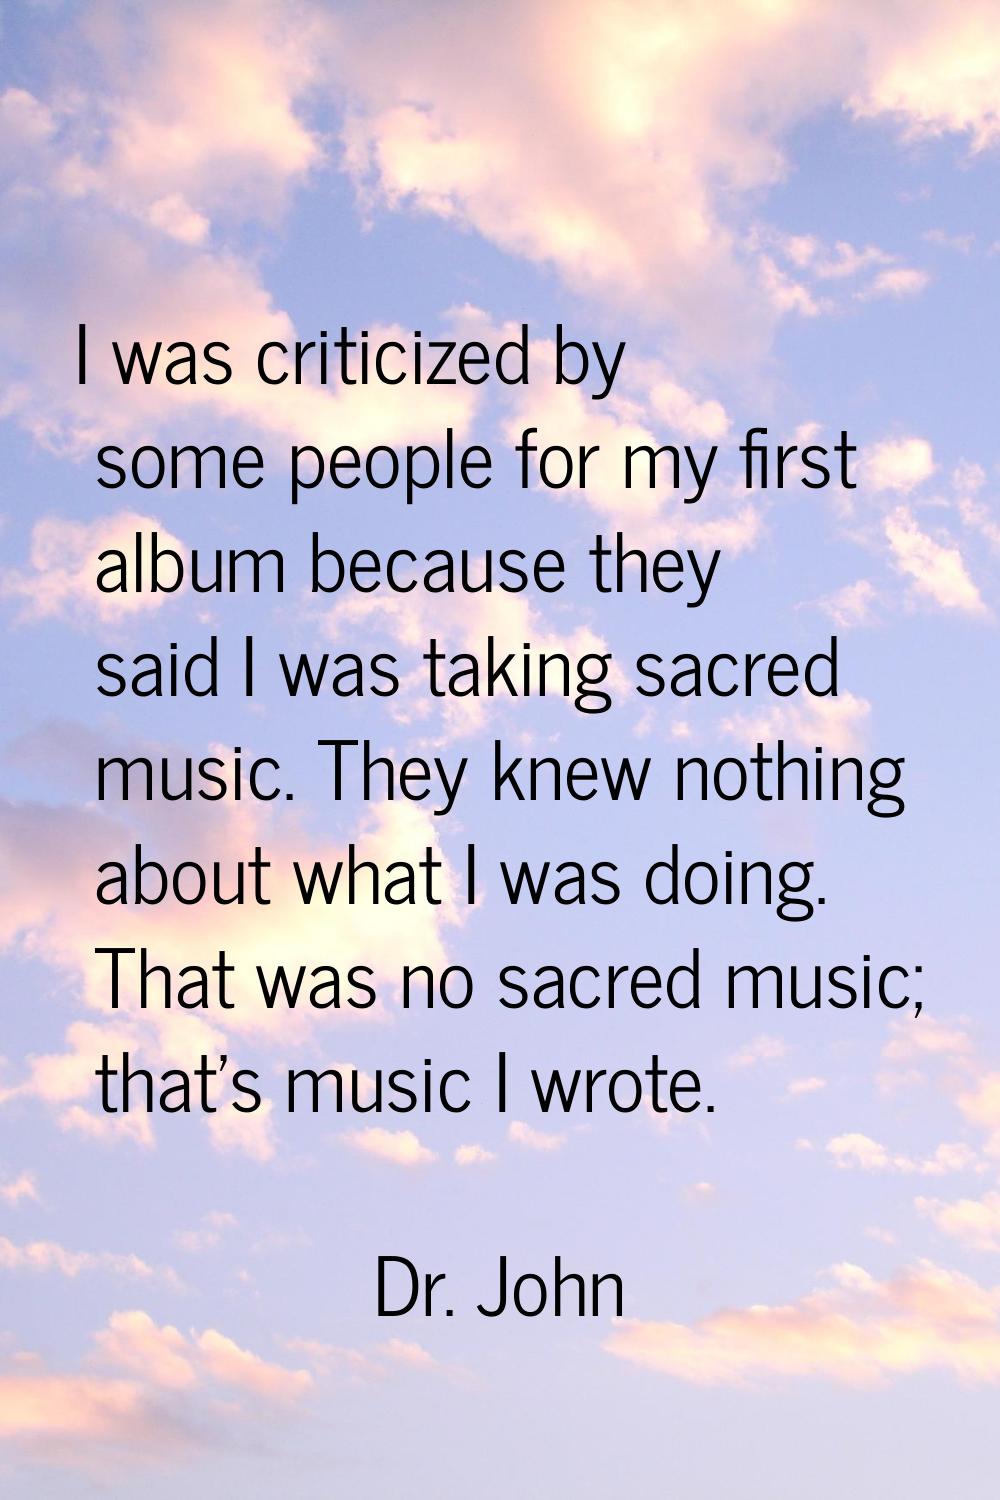 I was criticized by some people for my first album because they said I was taking sacred music. The